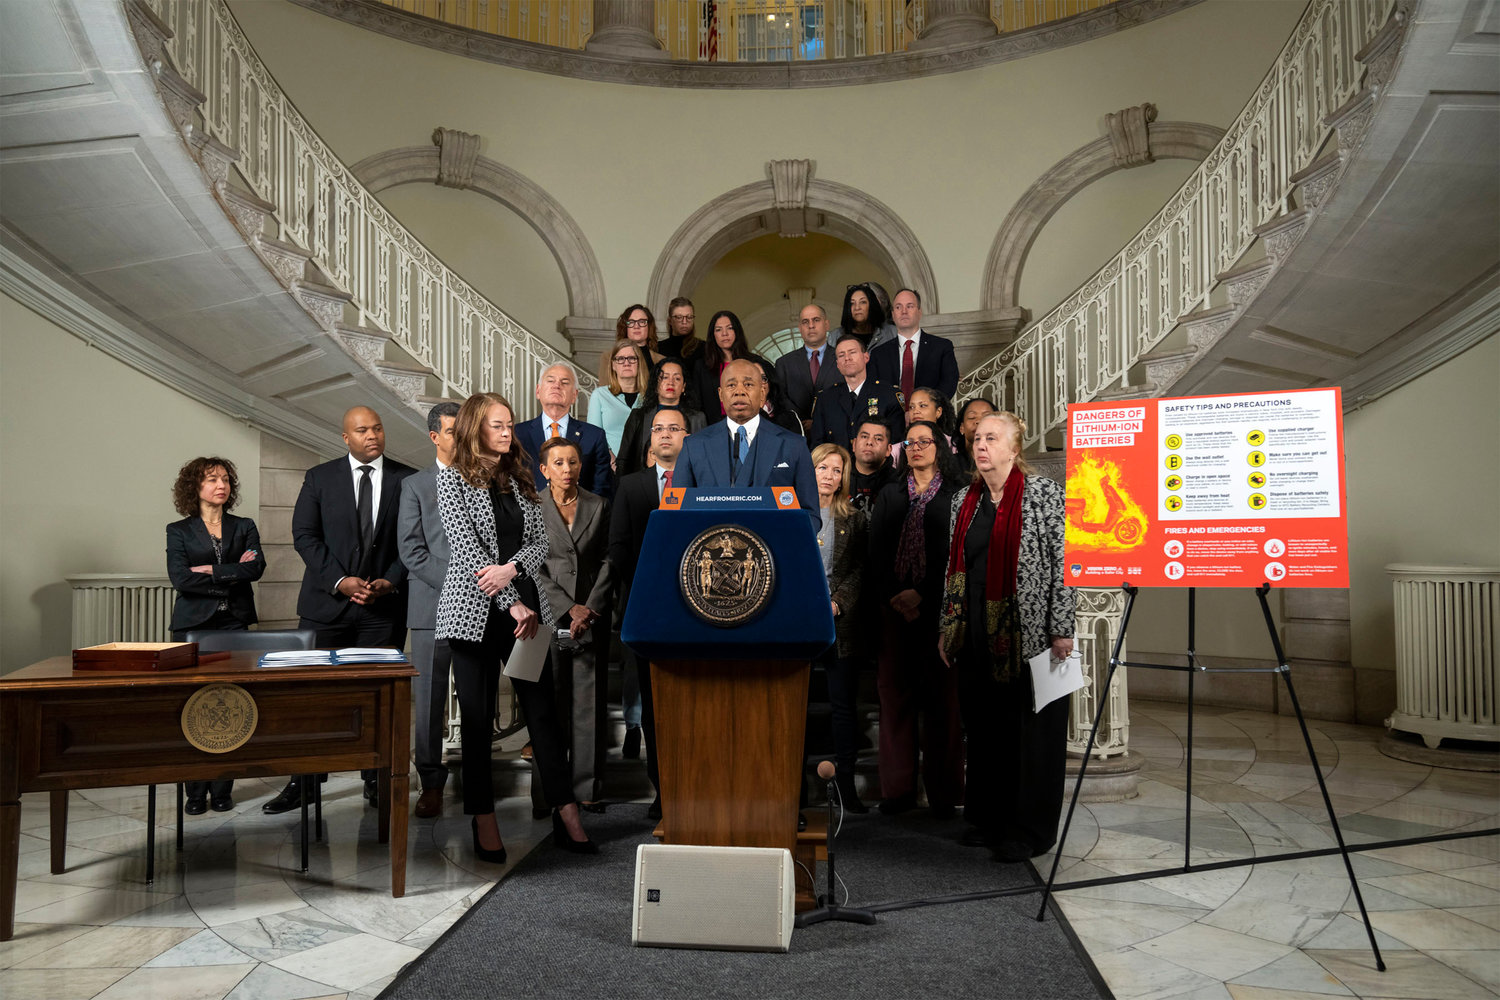 Mayor Eric Adams today announces “Charge Safe, Ride Safe: New York City’s Electric Micromobility Action Plan” to protect New Yorkers from fires caused by lithium-ion batteries and promote safe electric micromobility usage. Mayor Adams also signs five bills into law to further regulate lithium-ion batteries sold in New York City and strengthen fire safety related to battery fires. City Hall. Monday, March 20, 2023.